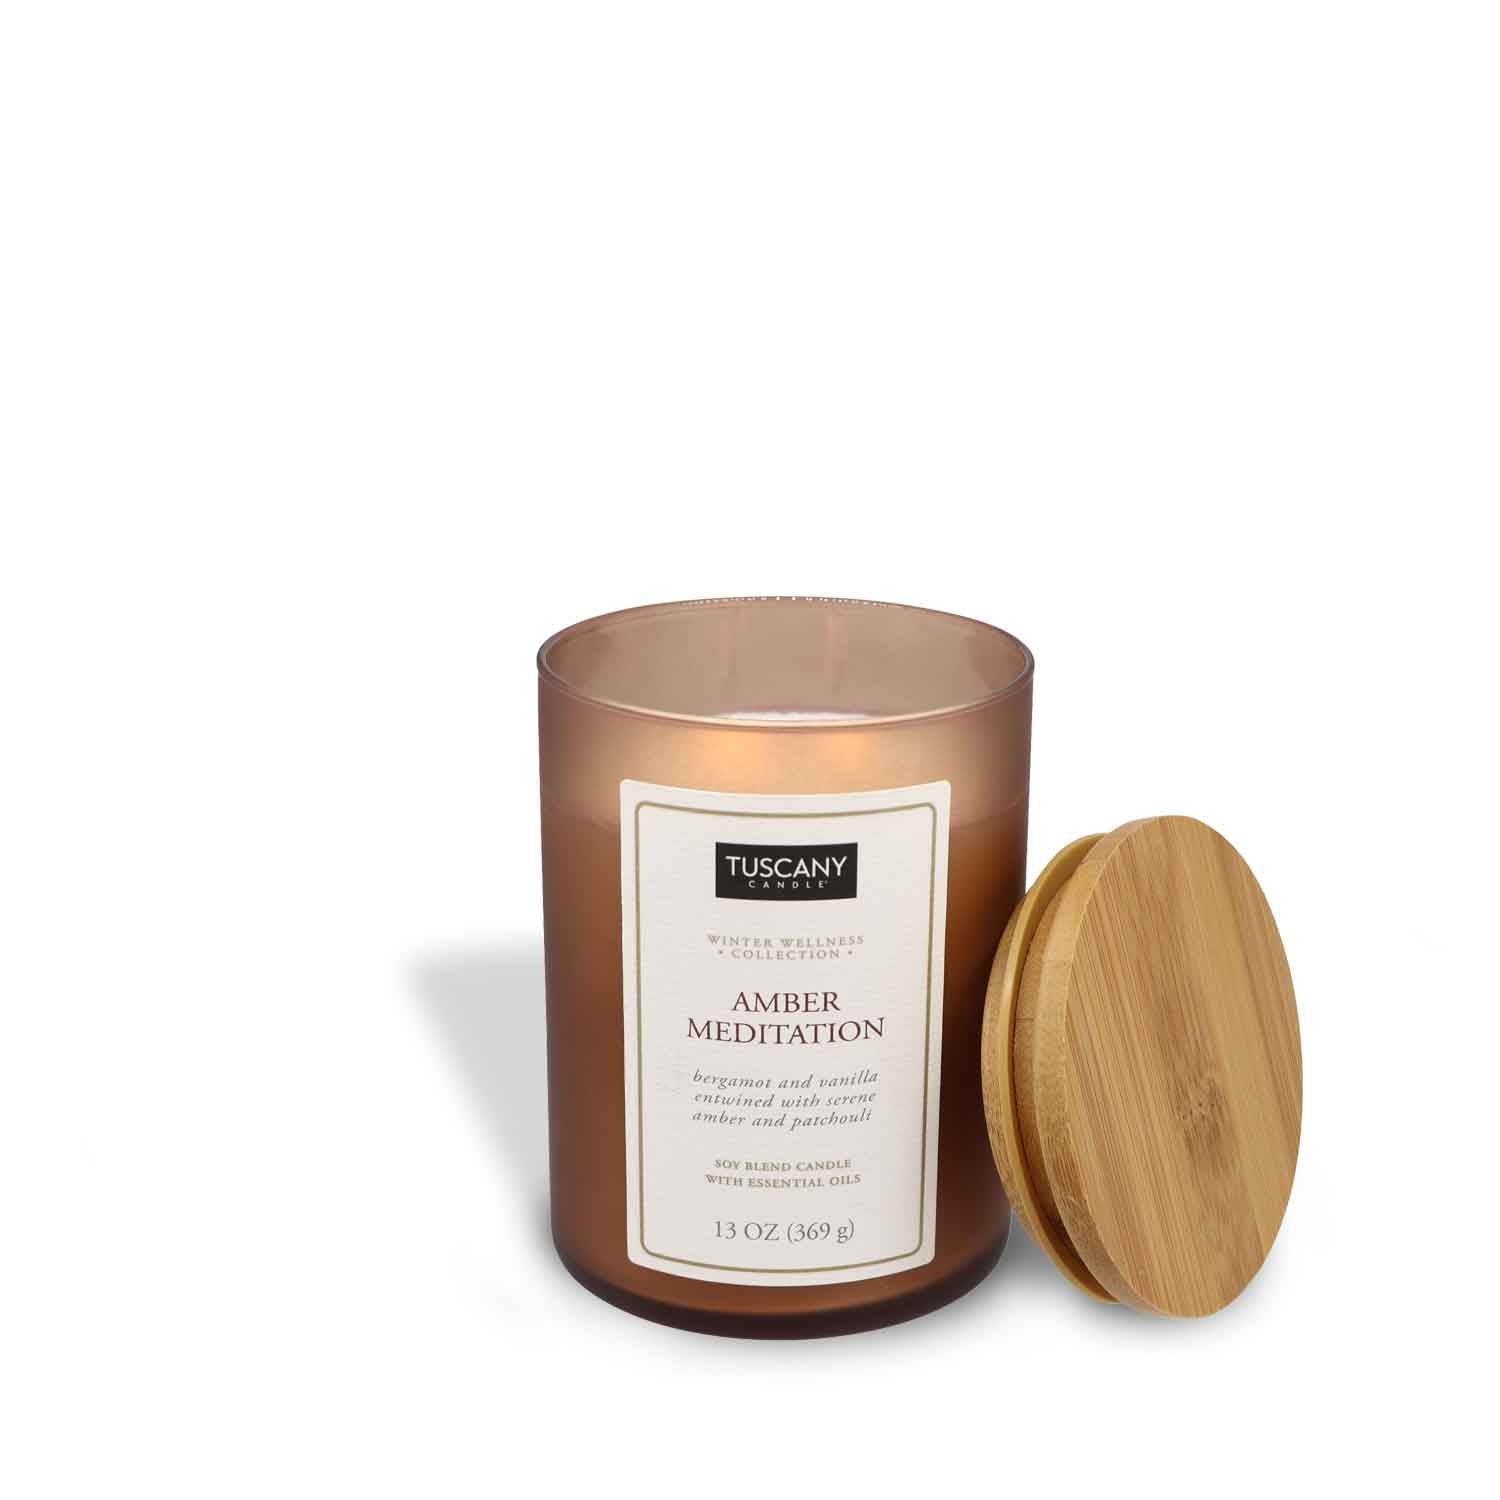 A Tuscany Candle Amber Meditation Scented Jar Candle (13 oz) – Winter Wellness Collection with a wooden lid on a white background.